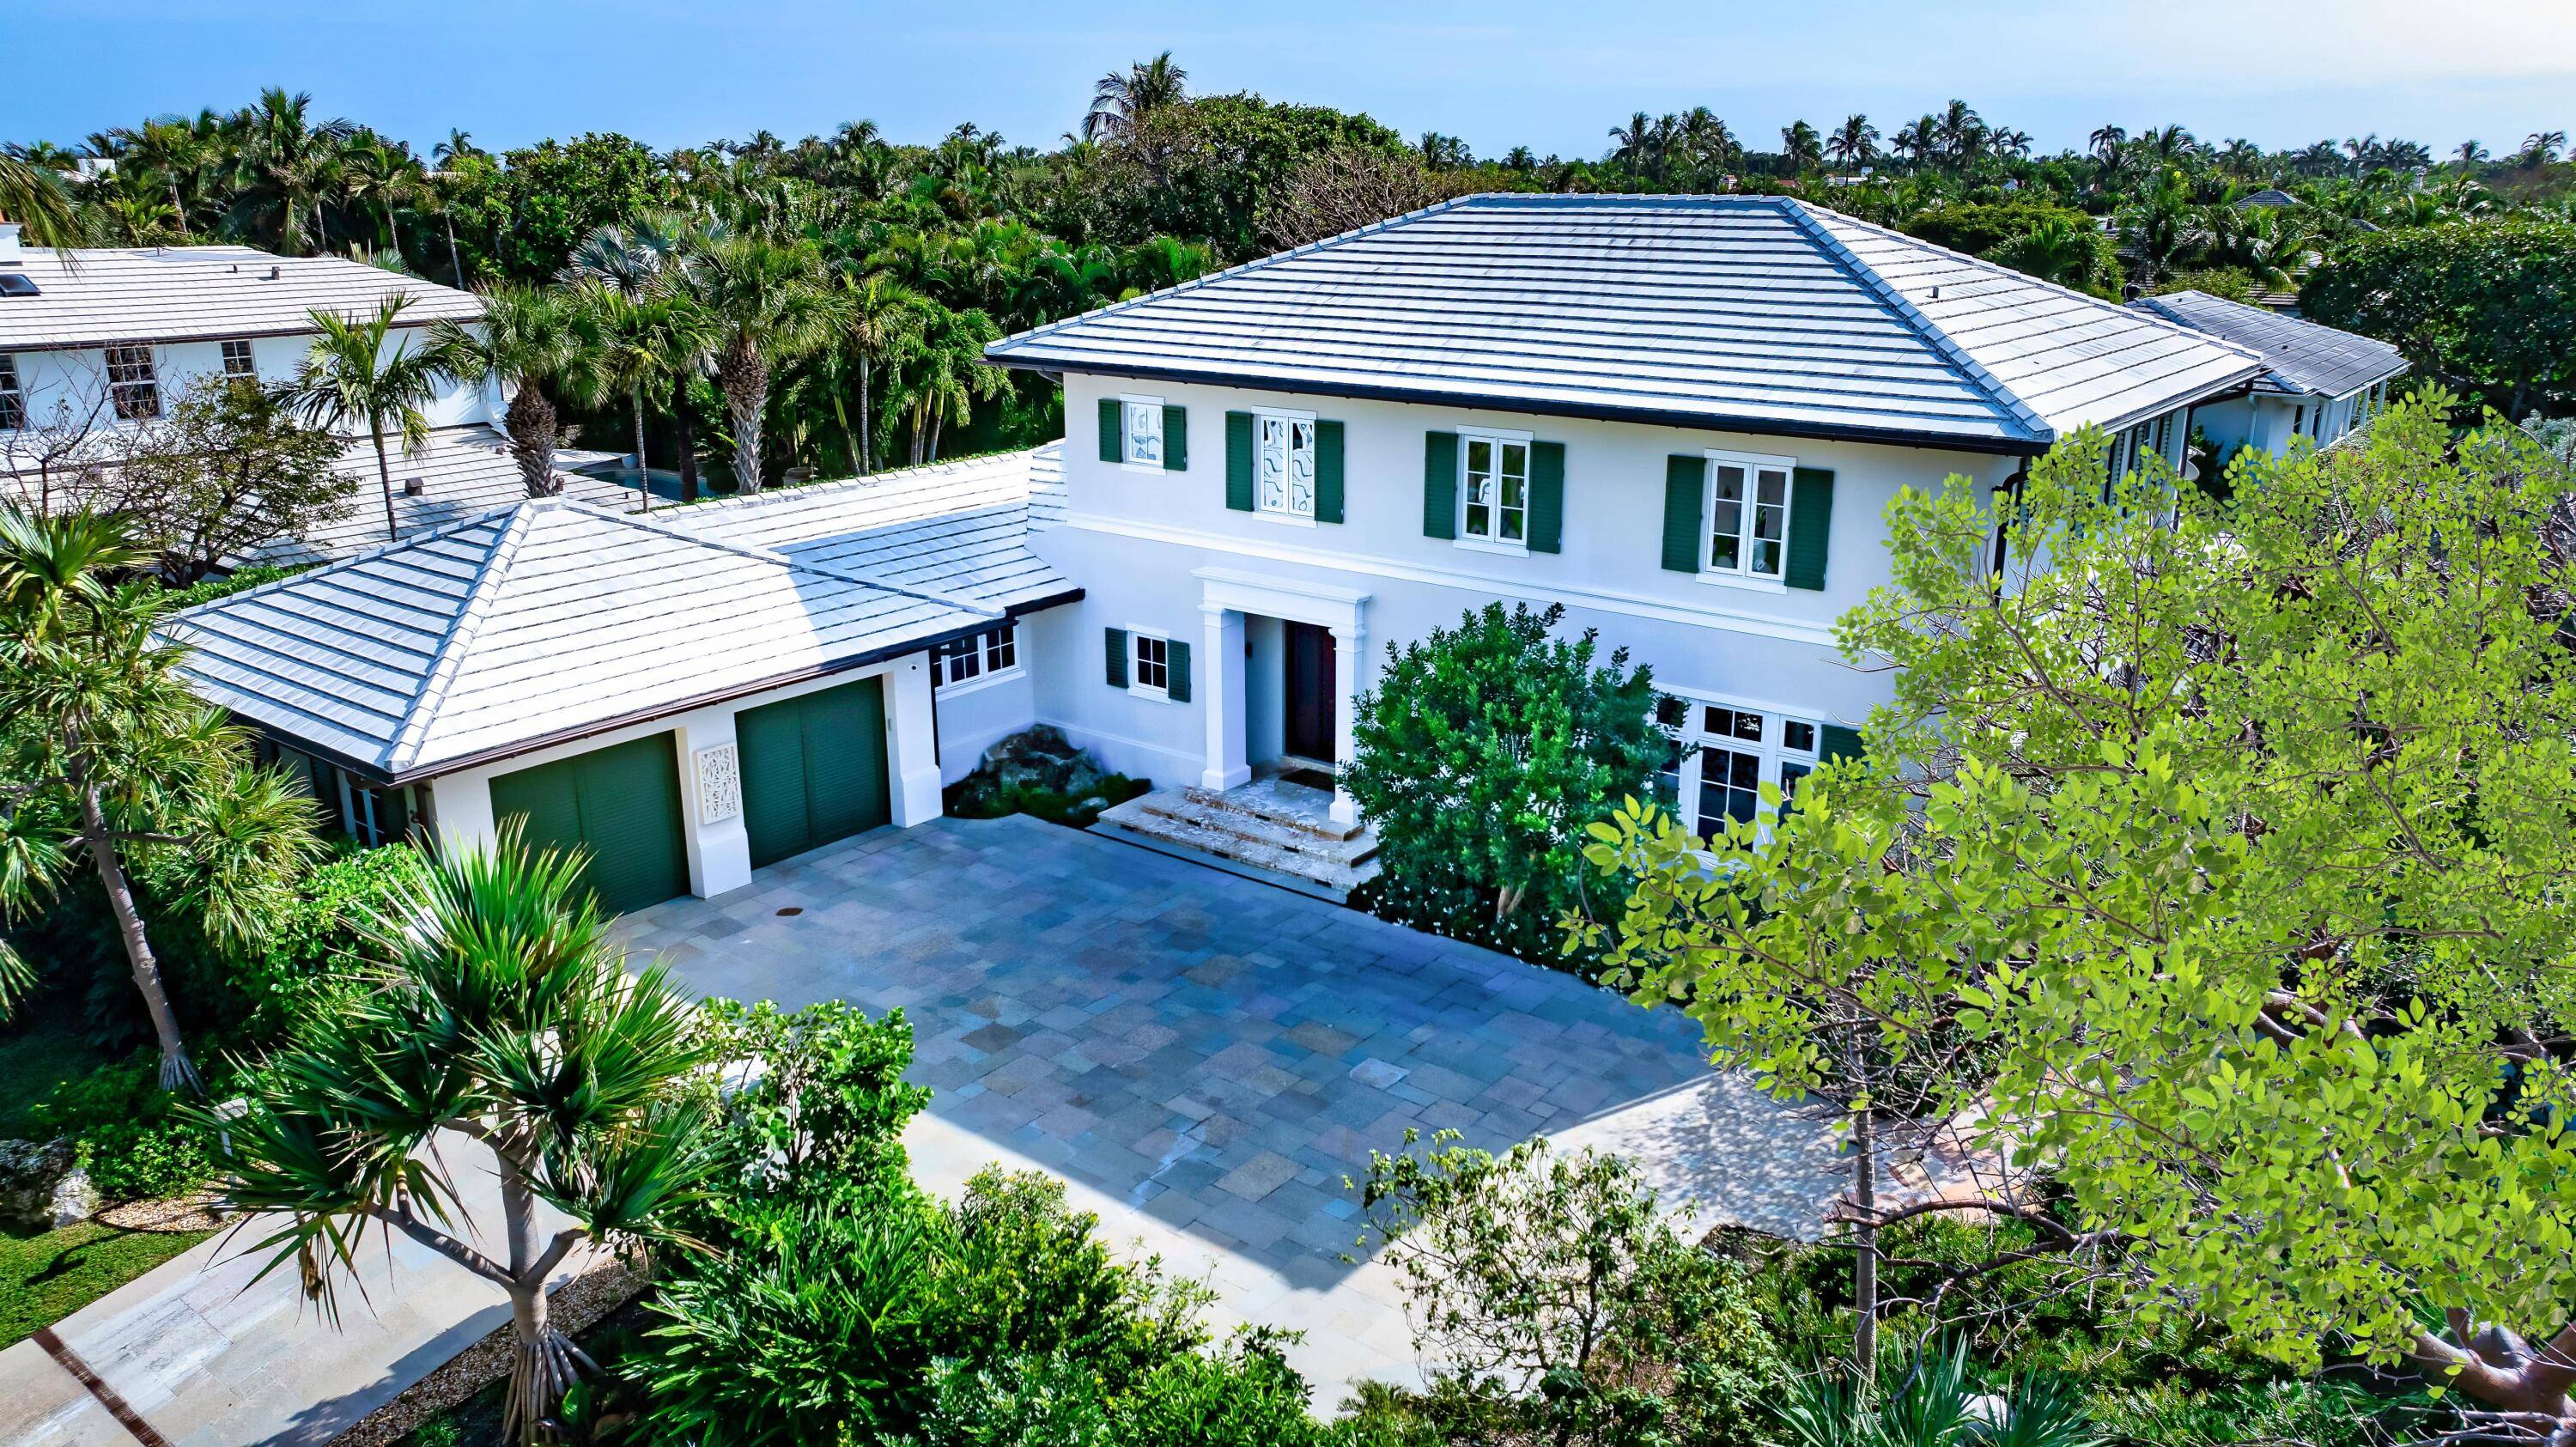 Welcome to 1333 N Lake Way 250 Angler Ave, an exceptional multi structure compound on the North End of Palm Beach Island.